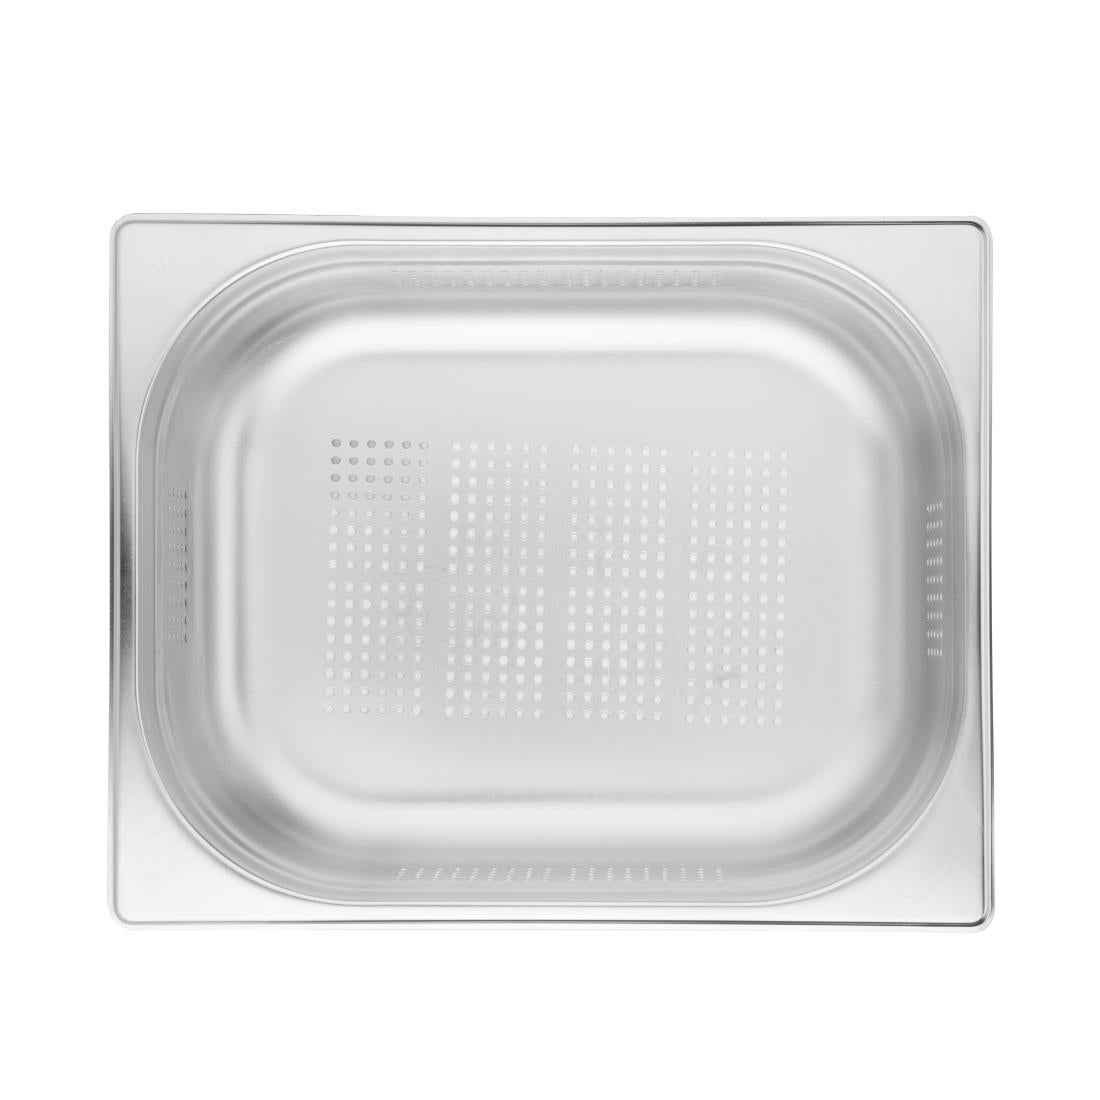 Vogue Stainless Steel Perforated 1/2 Gastronorm Pan 100mm